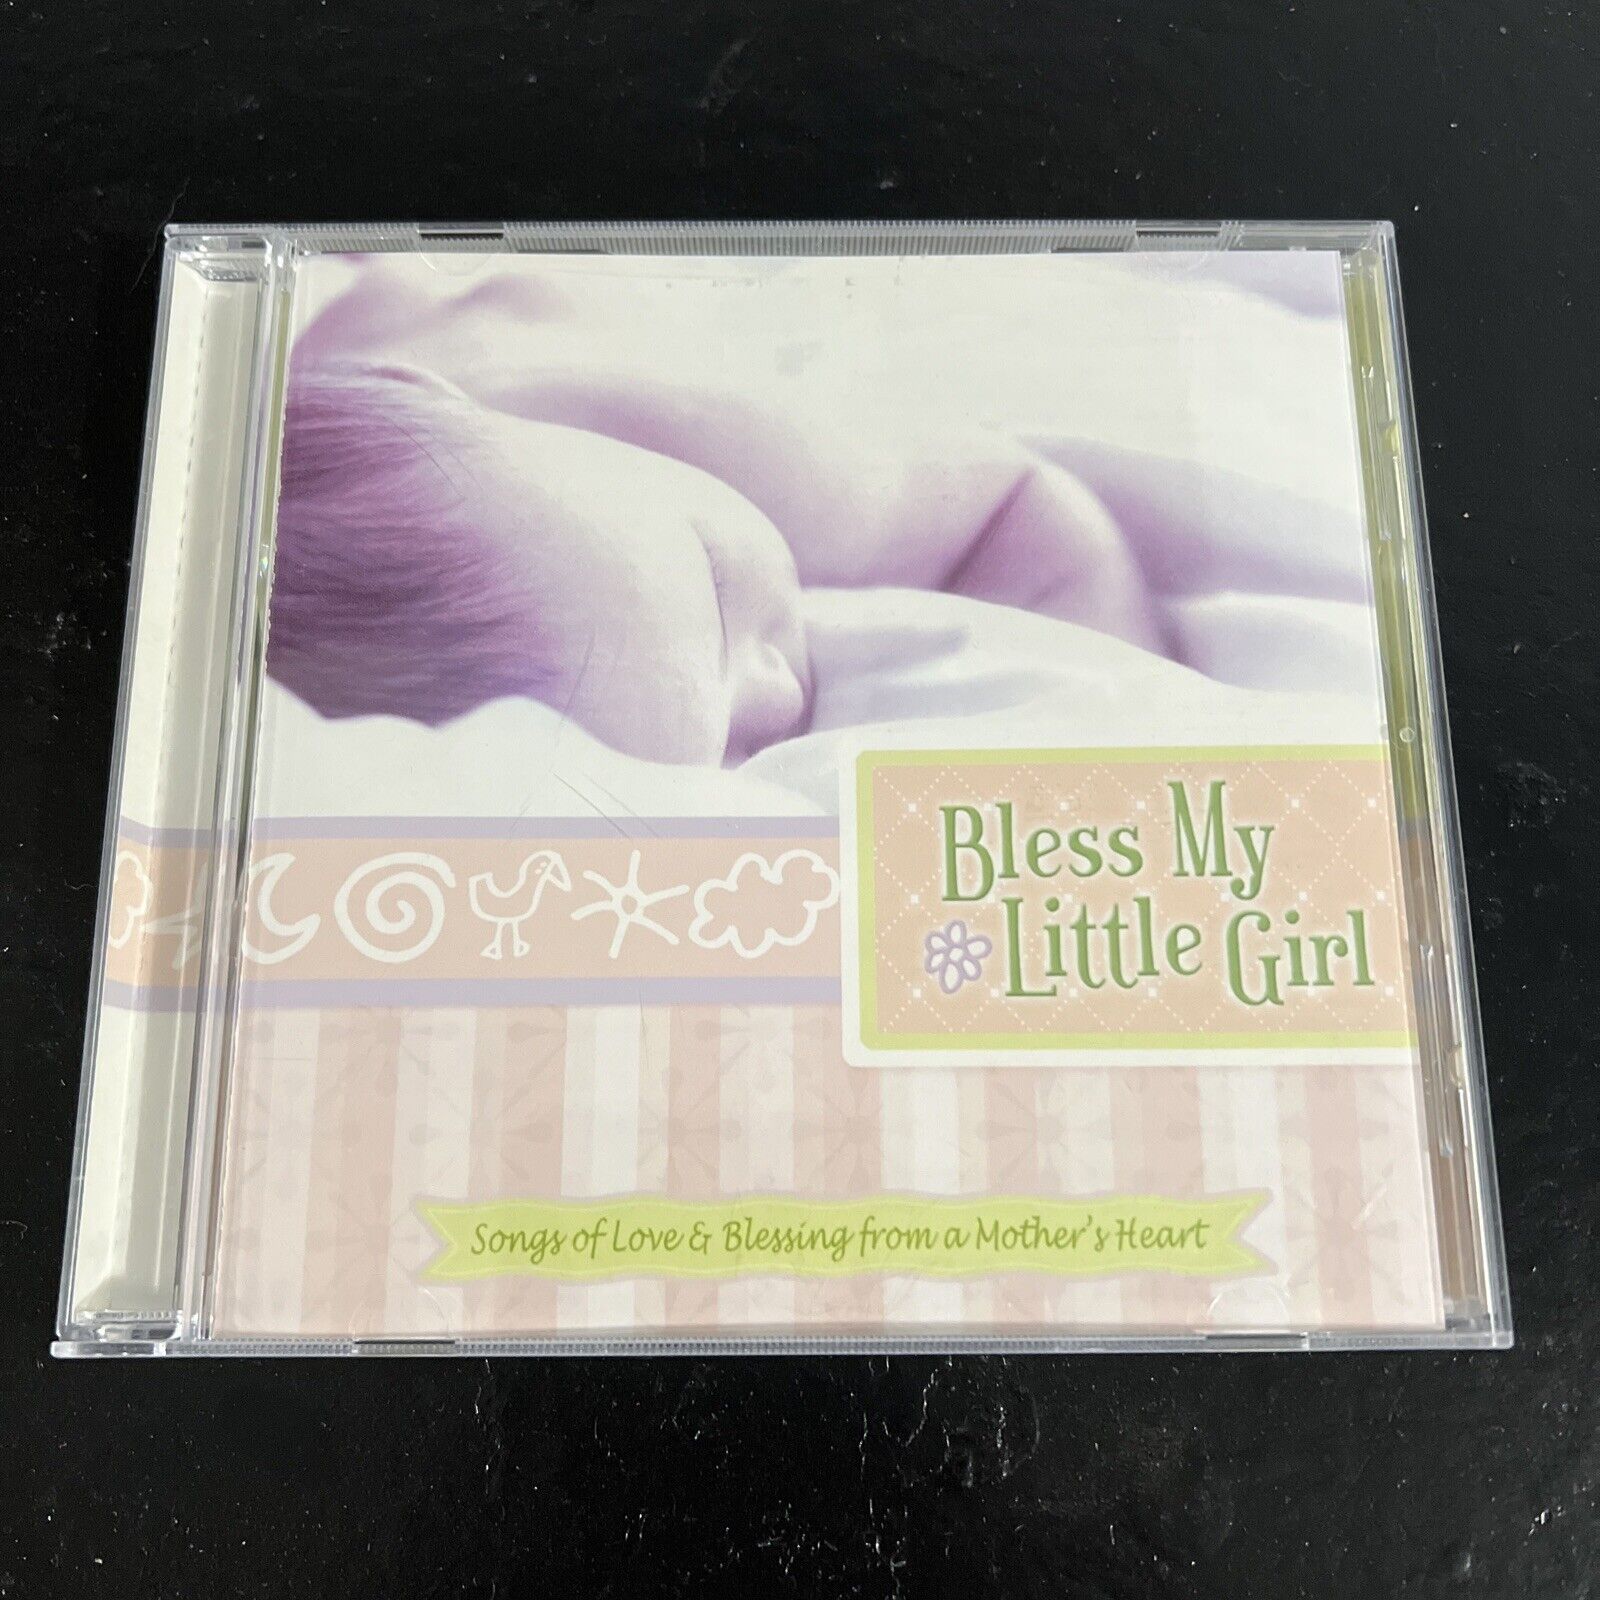 Bless My Little Girl by Kelly Willard (CD, Aug-1993, Integrity (USA))